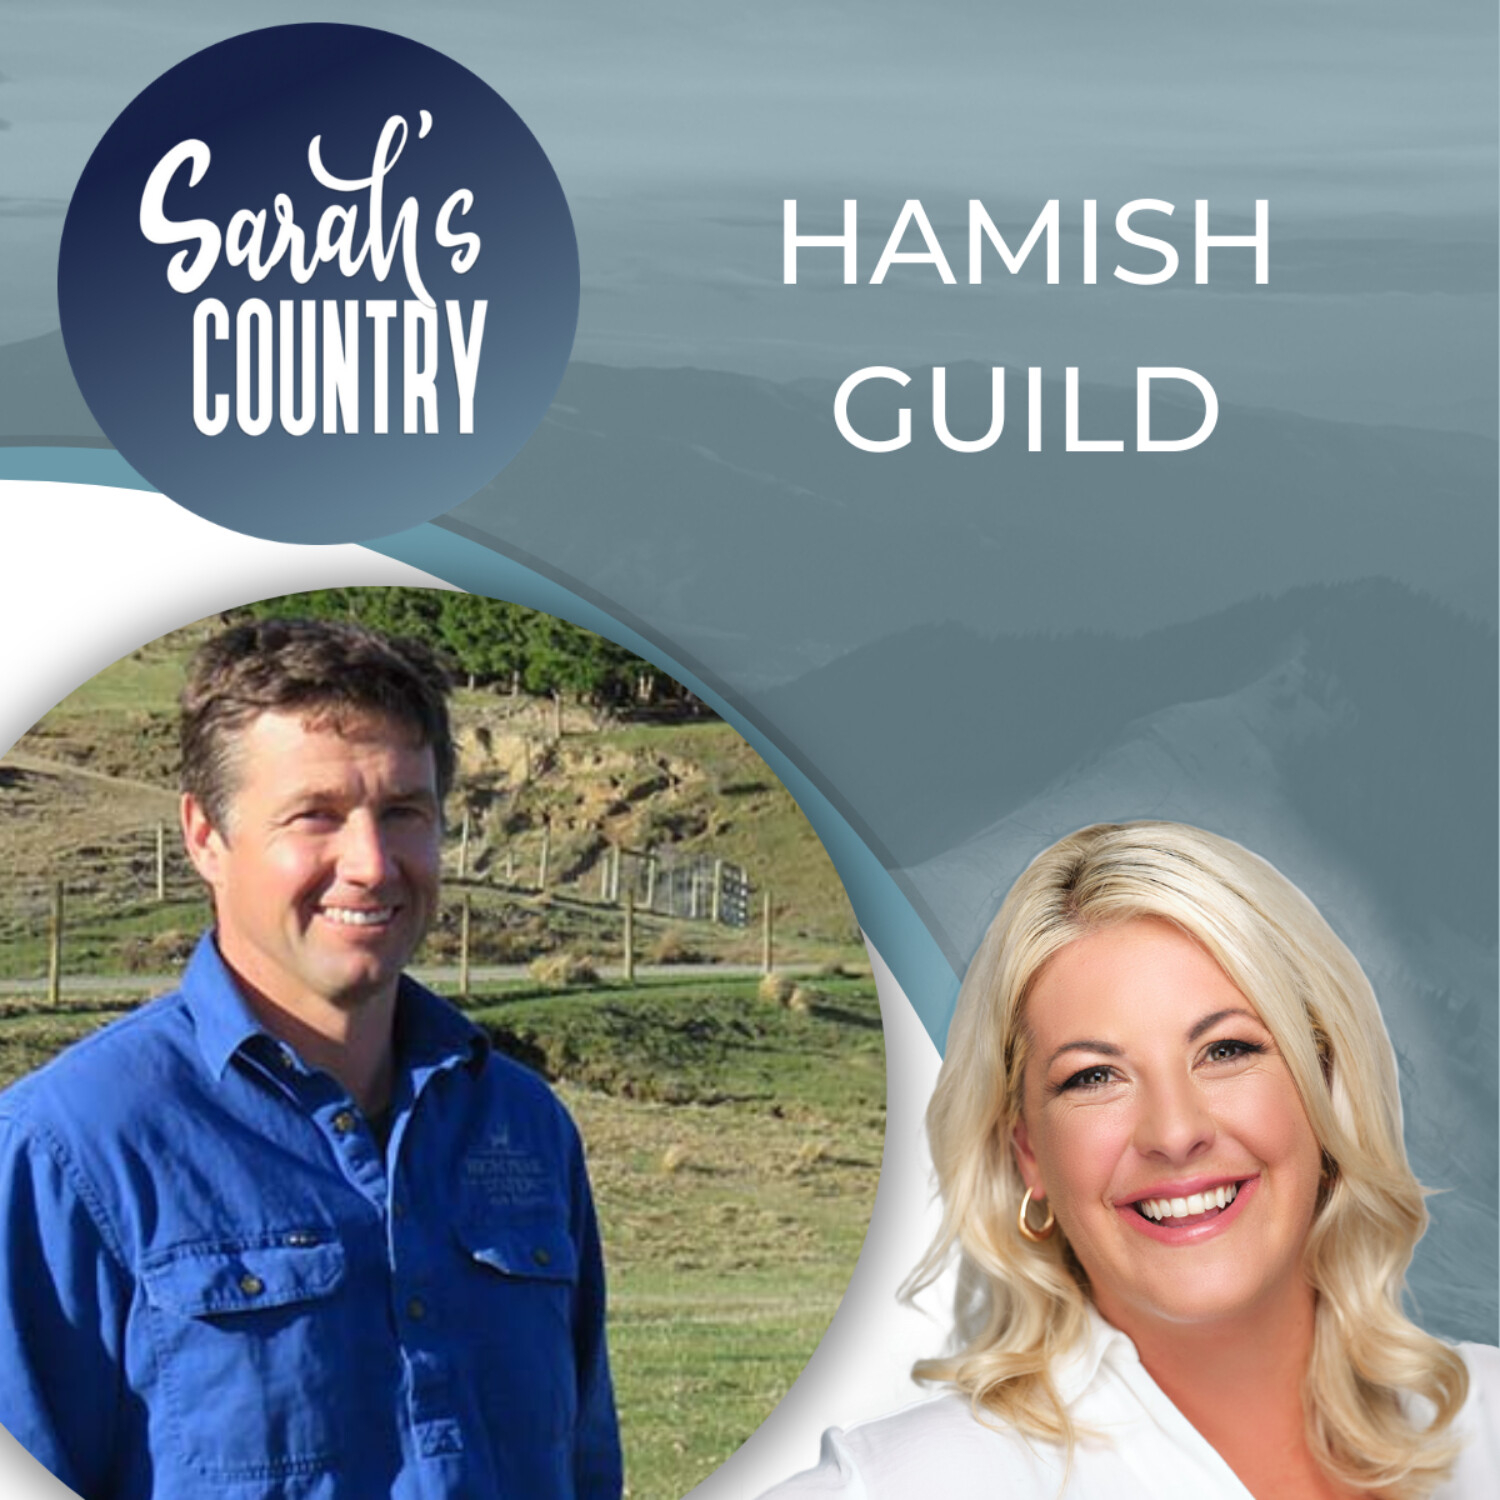 “What’s driving new consumer trends?” with Hamish Guild